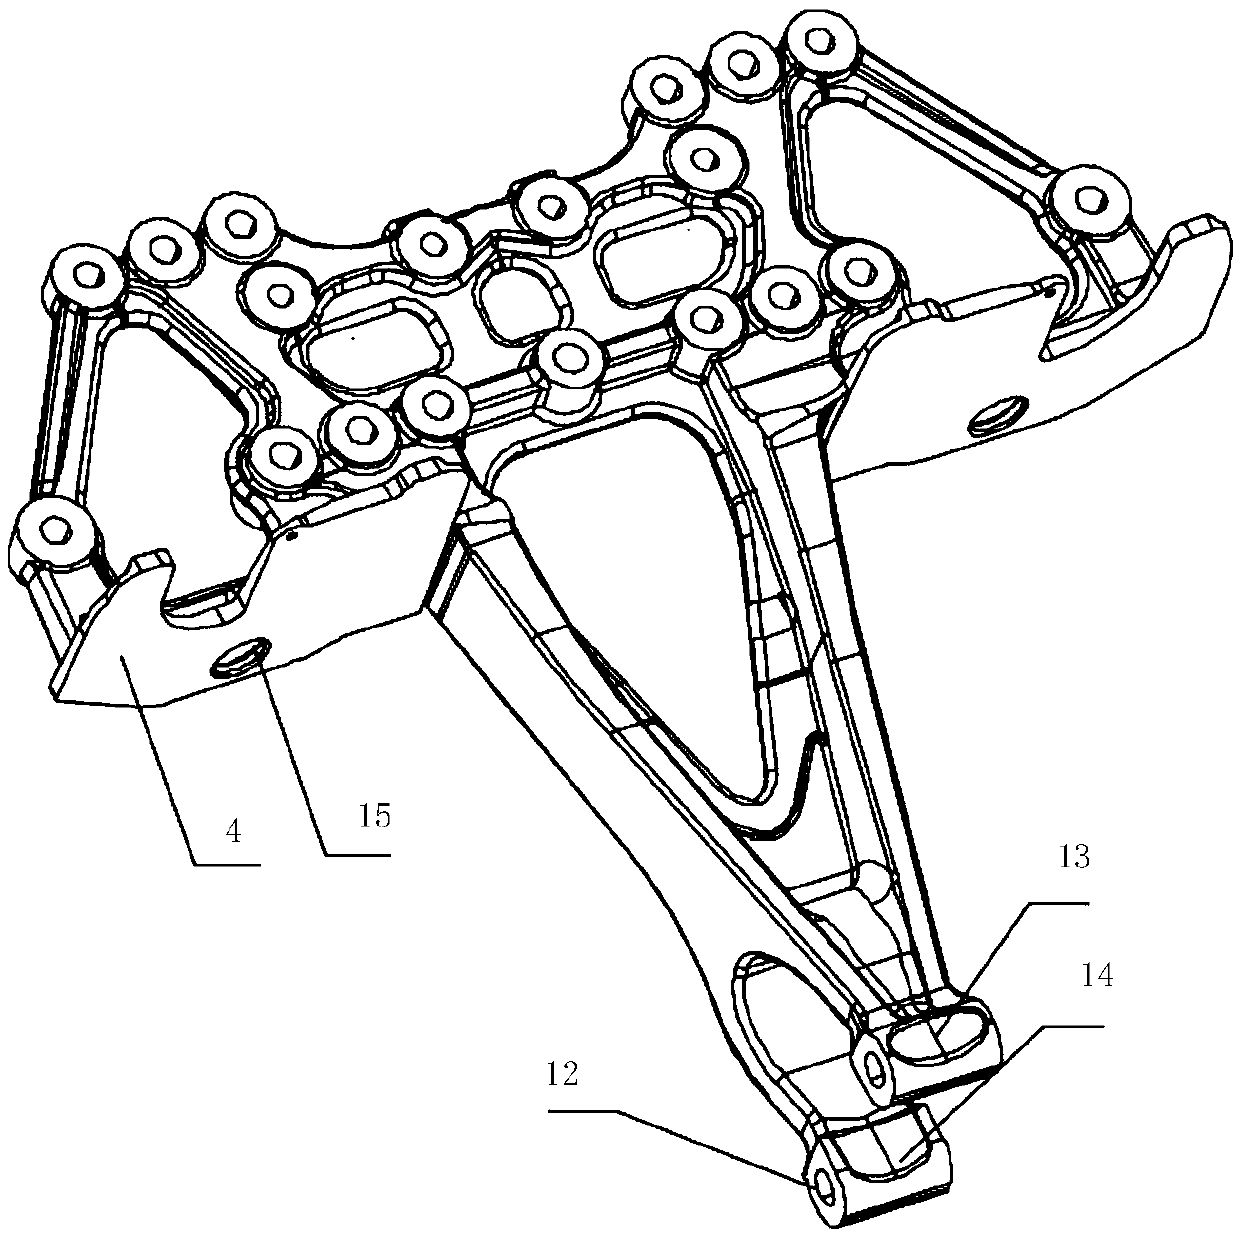 A functionally integrated bracket for an air suspension